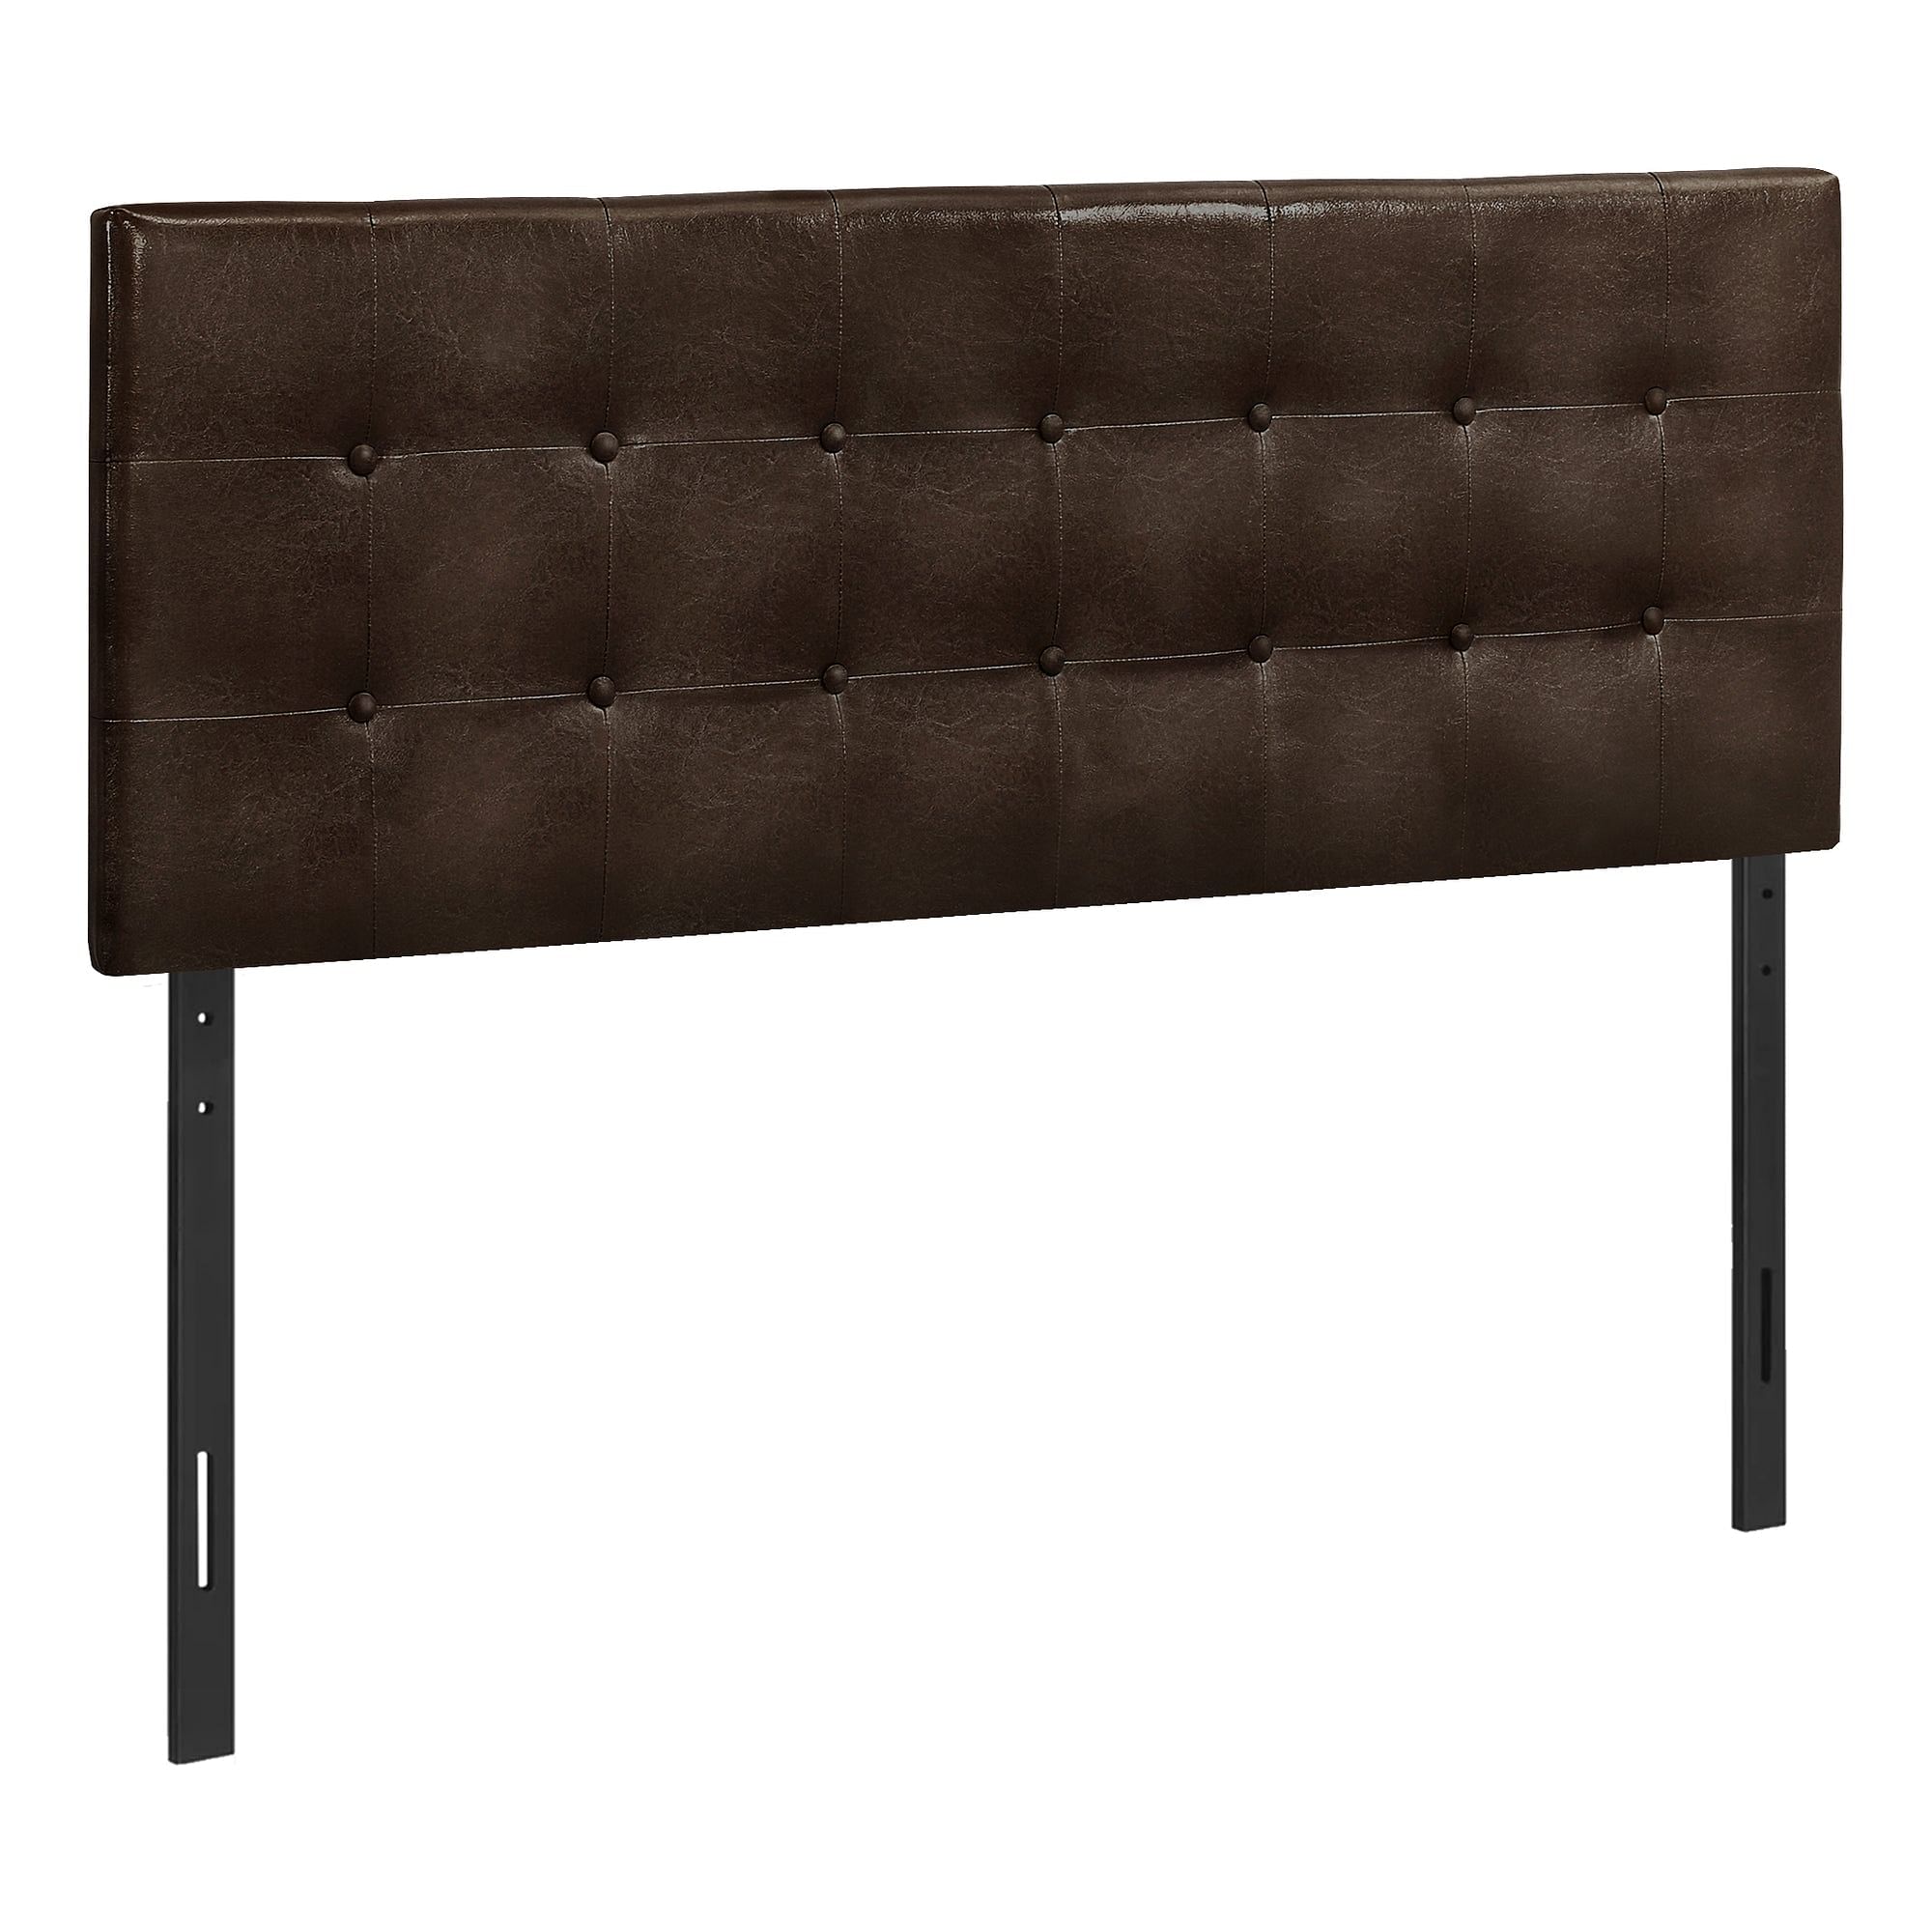 Bed - Queen Size / Brown Leather-Look Headboard Only